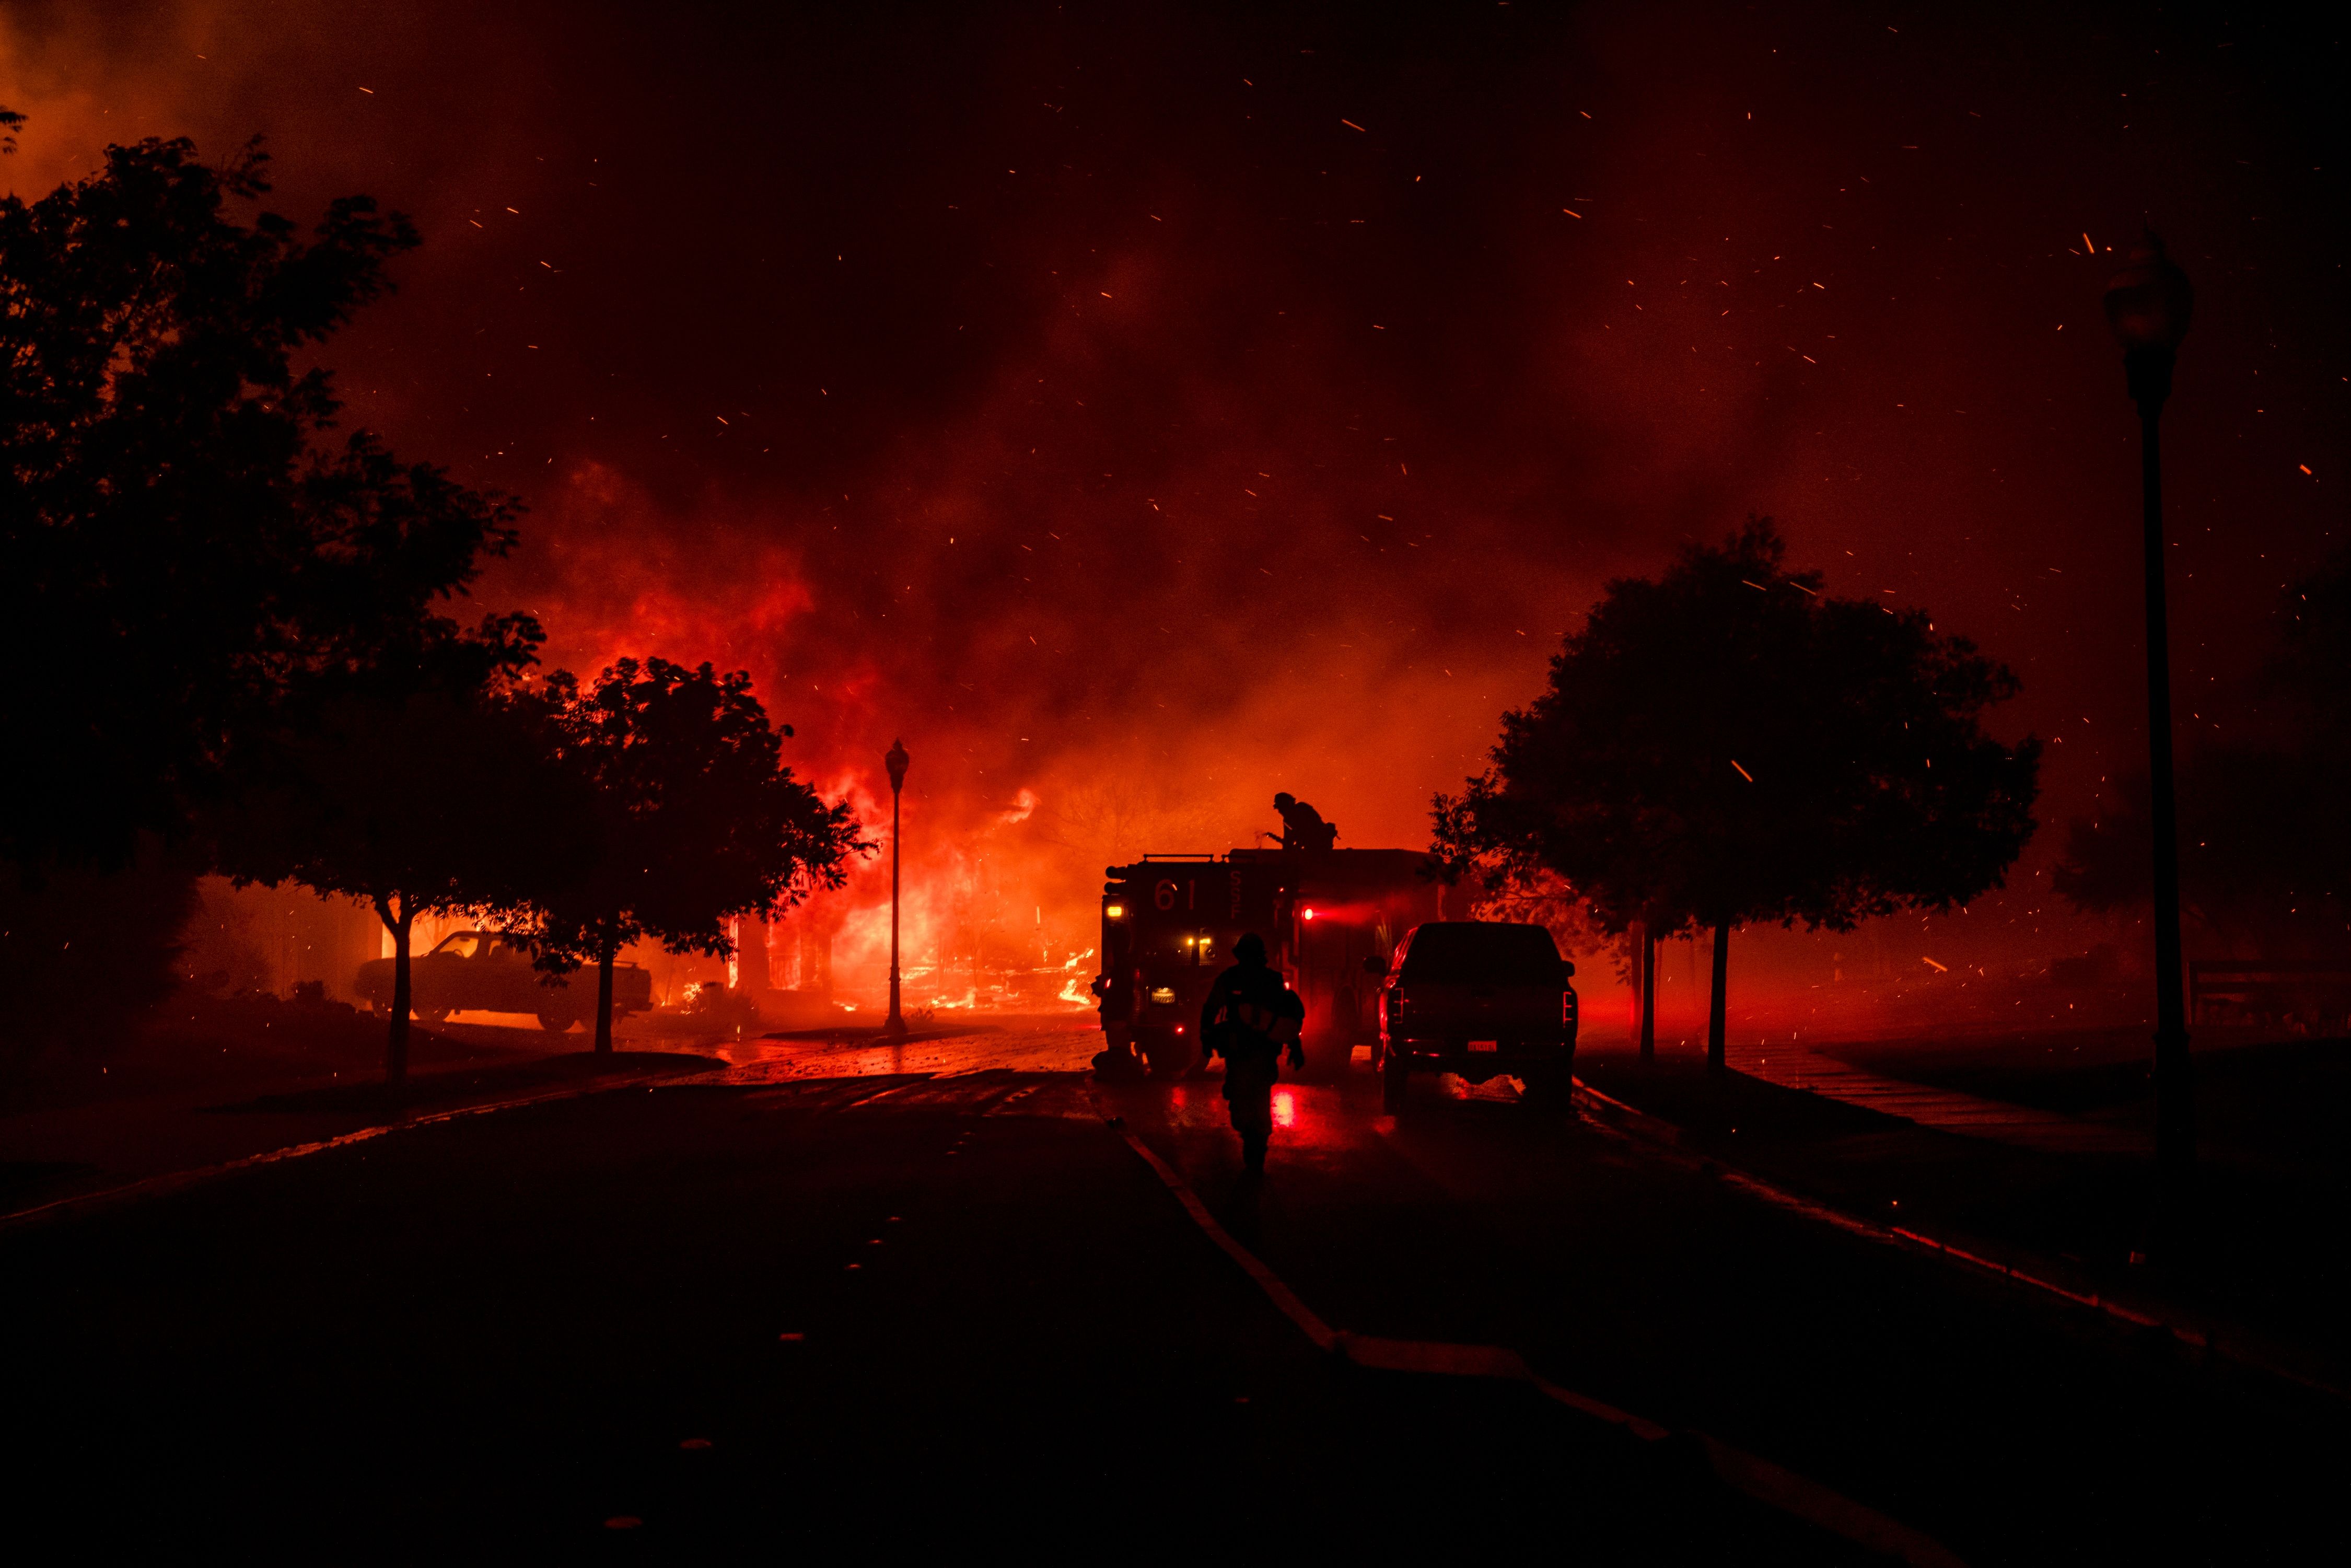 Firefighters intervene while a home bursts into flames from the Shady Fire as it approaches Santa Rosa, on September 28